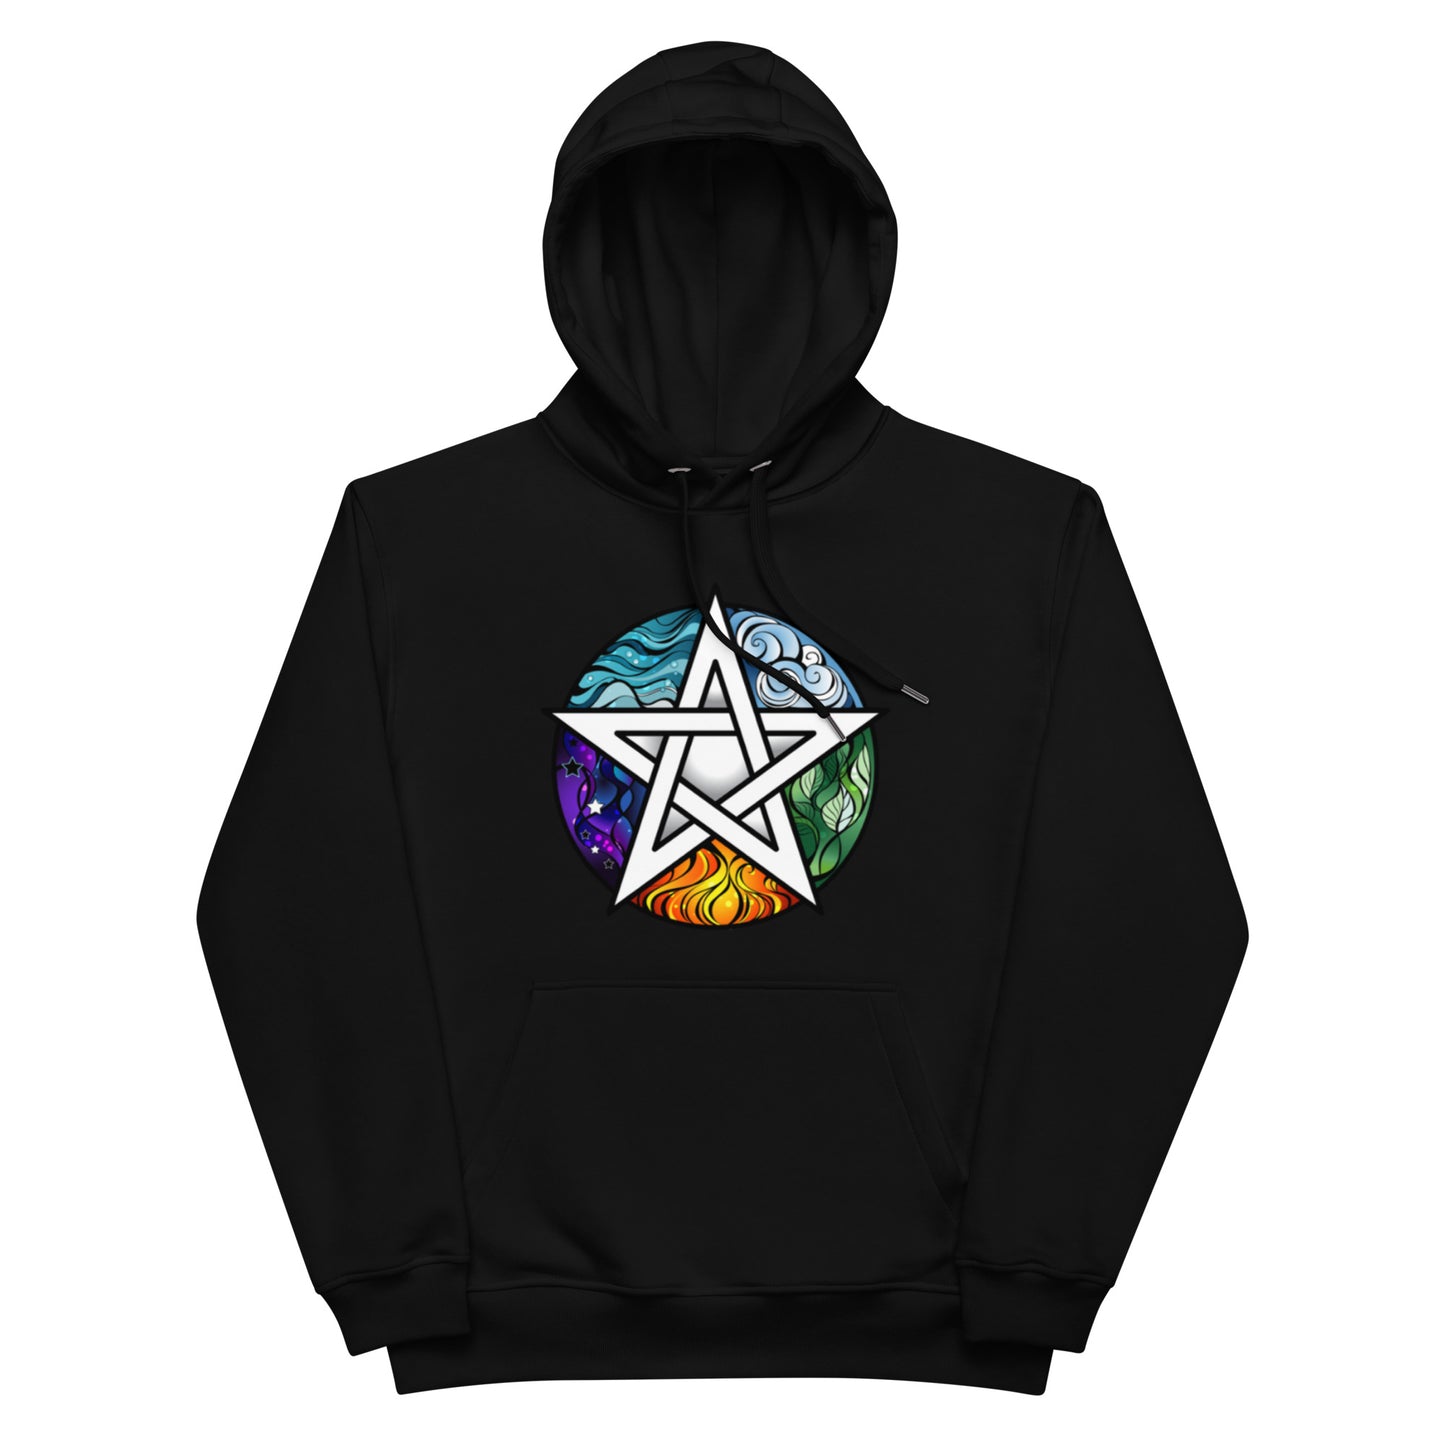 Unisex Premium Eco Hoodie: Pentacle with Elements (Earth Air Fire Water Spirit)